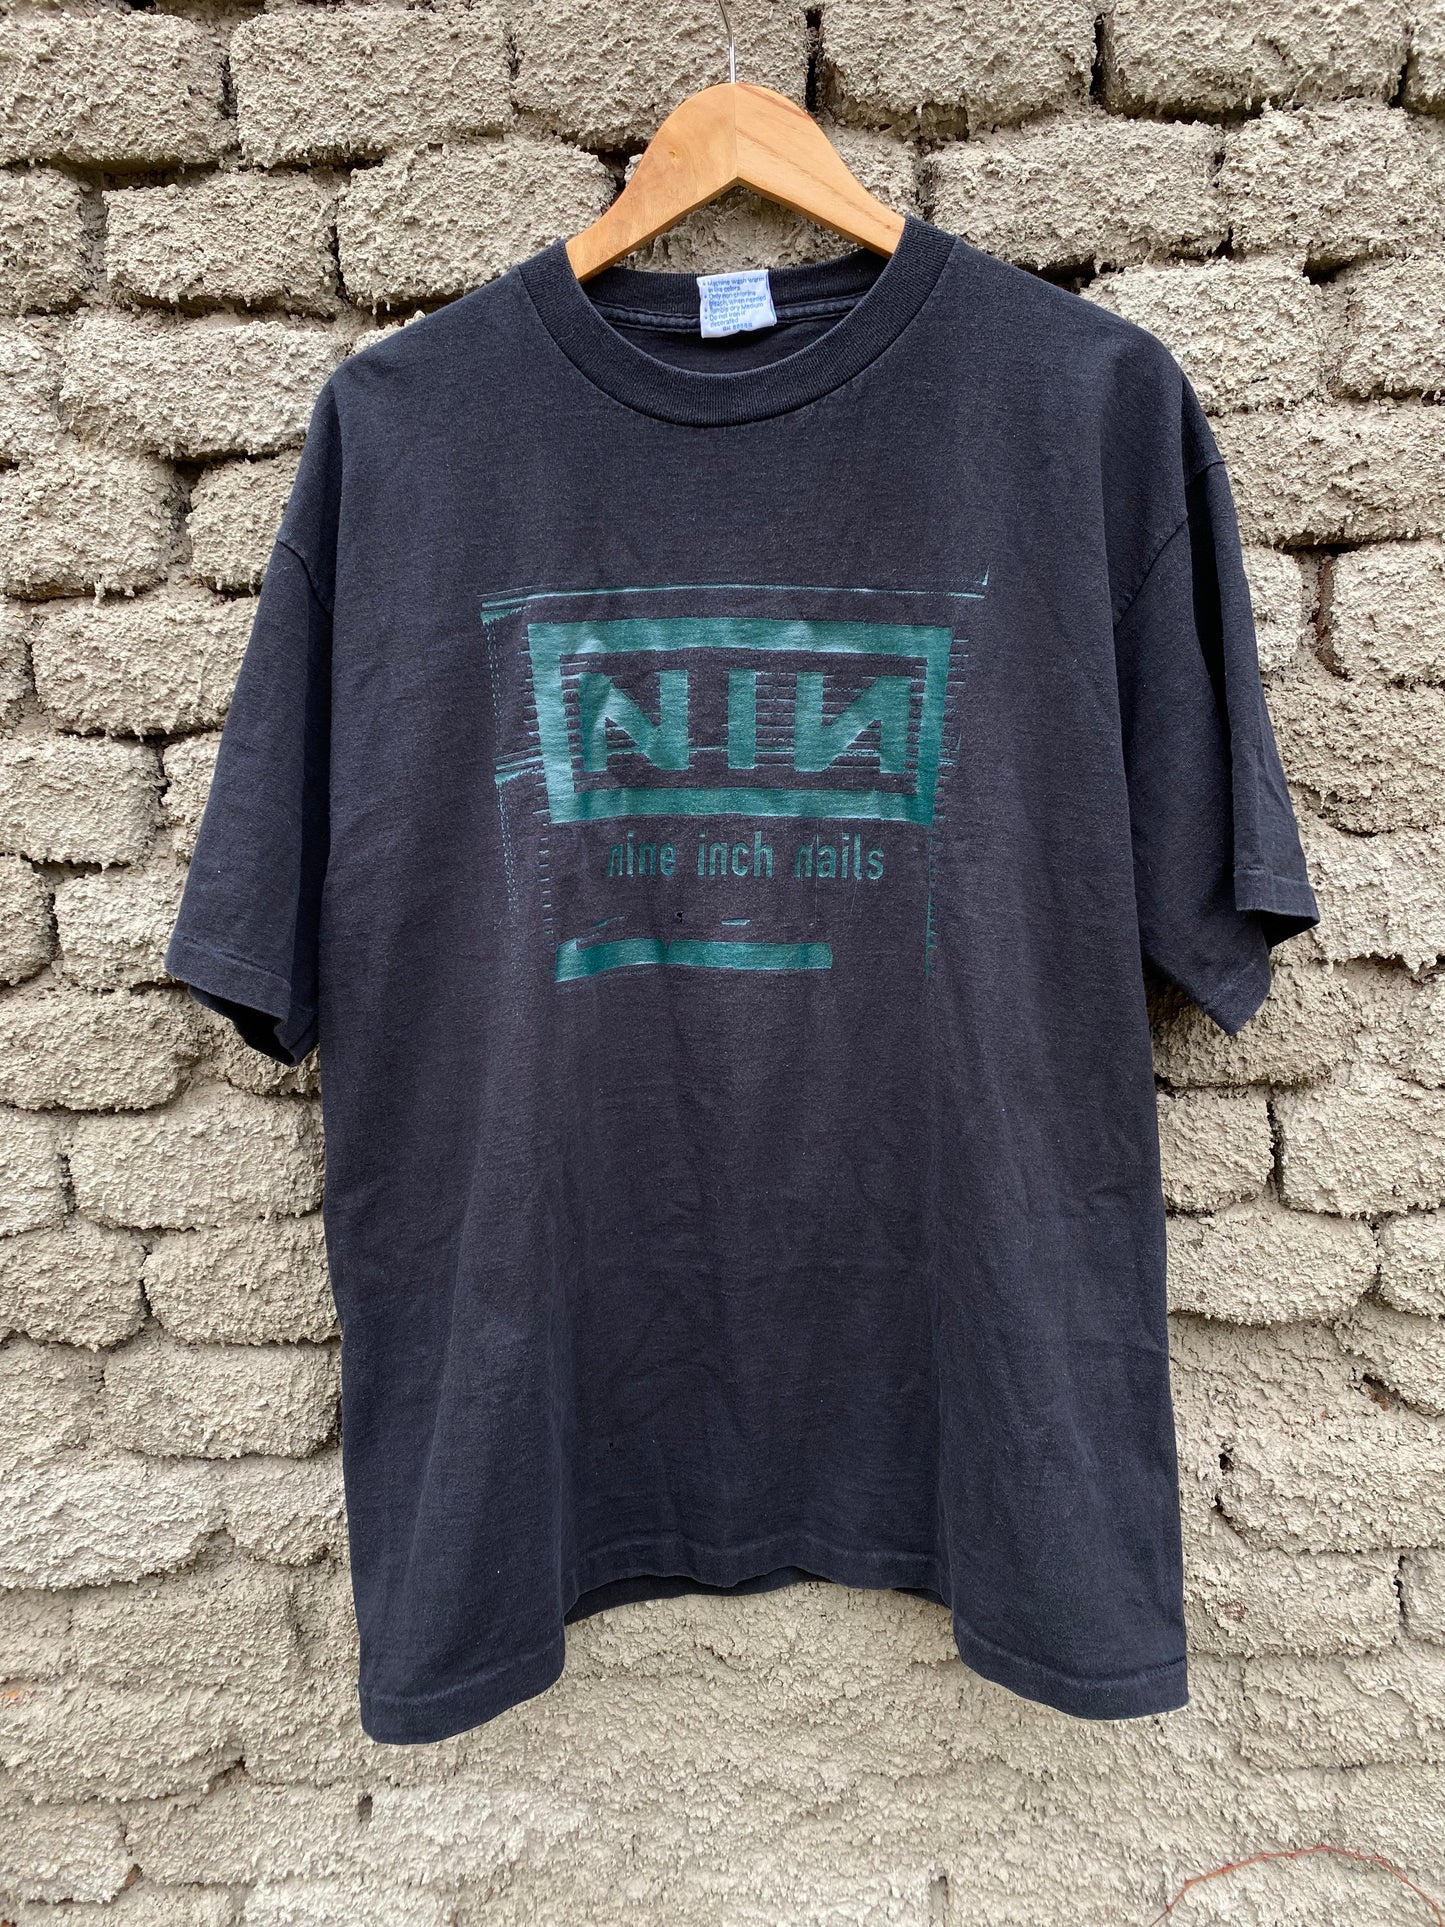 Vintage Nine Inch Nails "Nothing" 1996 t-shirt - size XL